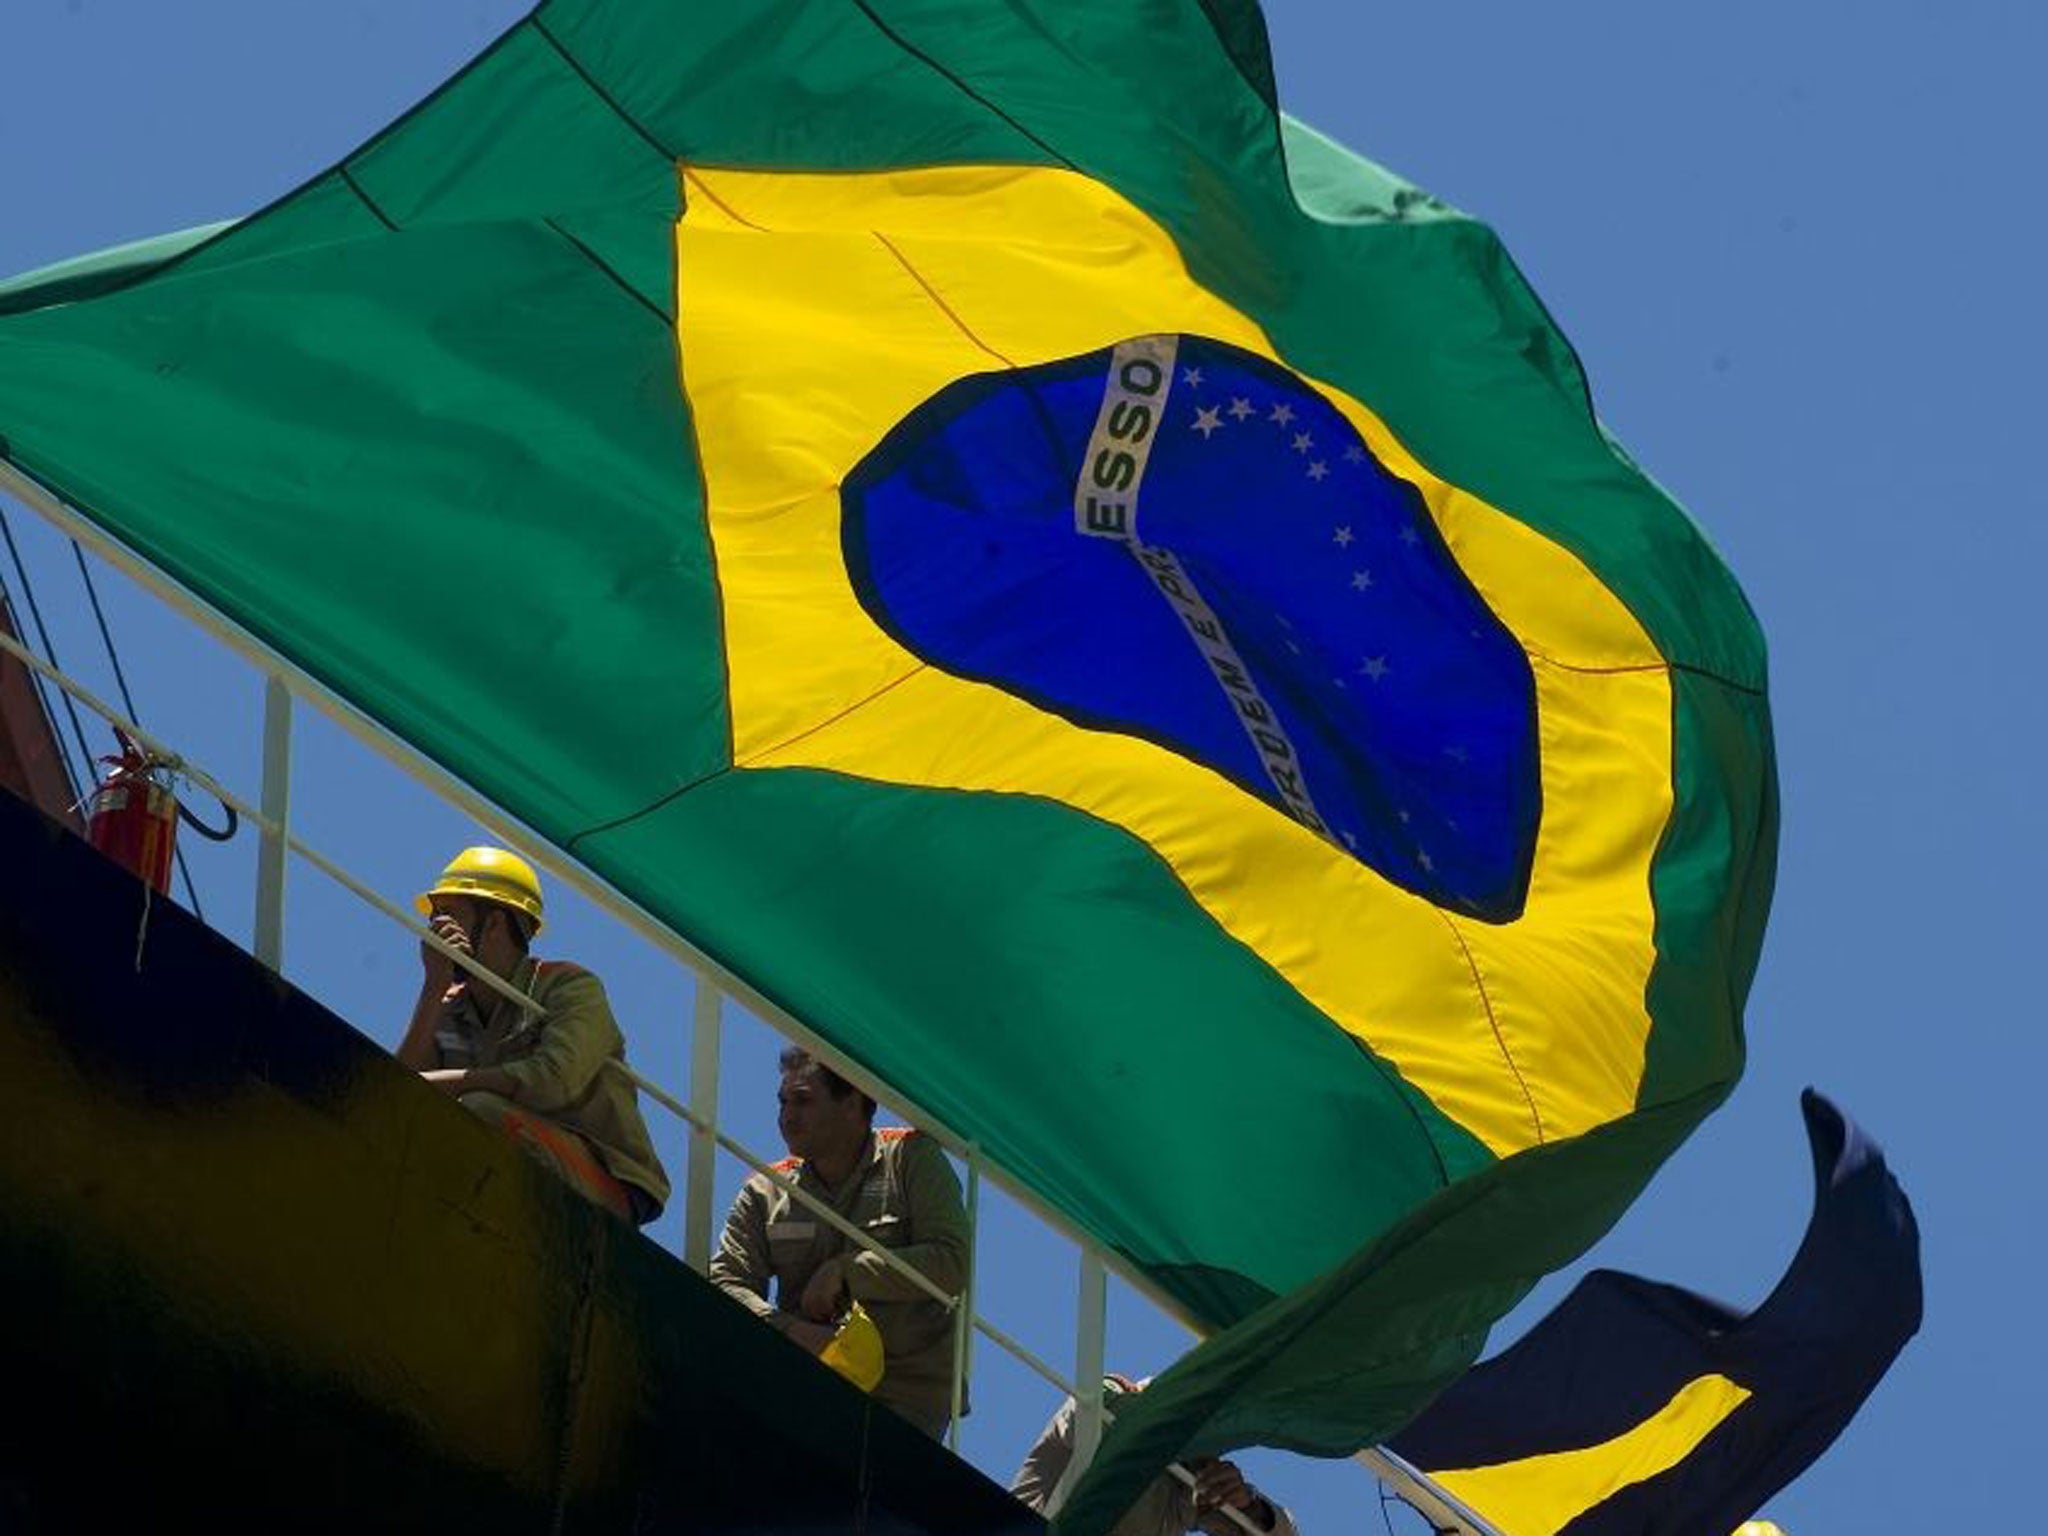 There is a frenzy of building and infrastructure improvements across Brazil as it prepares to host the World Cup in 2014 and the Olympic Games in 2016